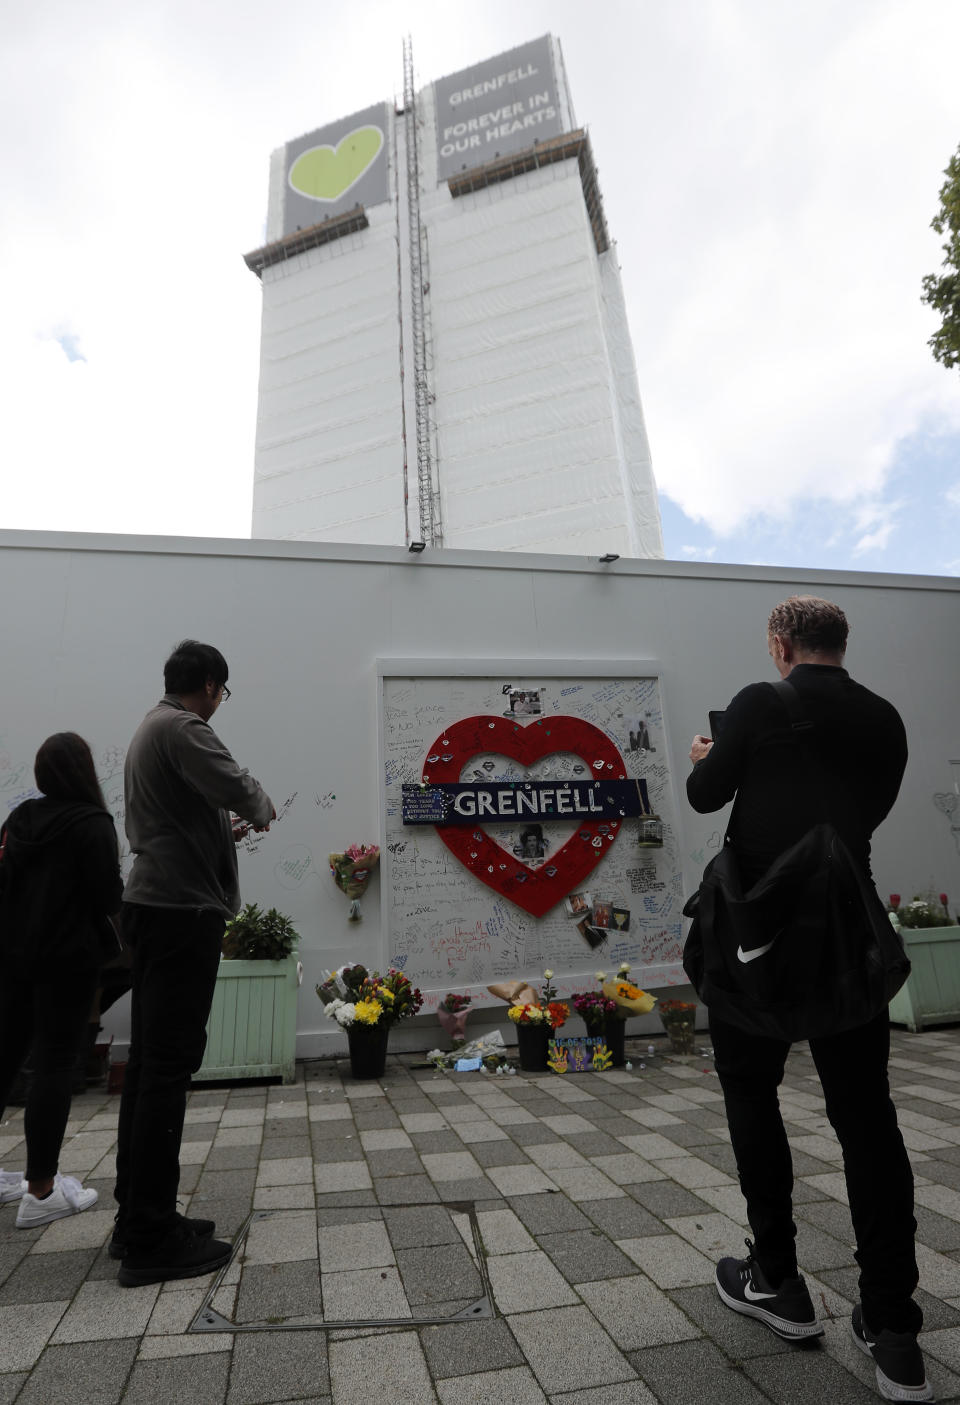 People mourn at the Grenfell tower to mark the two-year anniversary of the Grenfell Tower block fire in London, Friday, June 14, 2019. Survivors, neighbors and politicians including London Mayor Sadiq Khan attended a church service of remembrance on Friday for the Grenfell Tower blaze, the deadliest fire on British soil since World War II. (AP Photo/Frank Augstein)